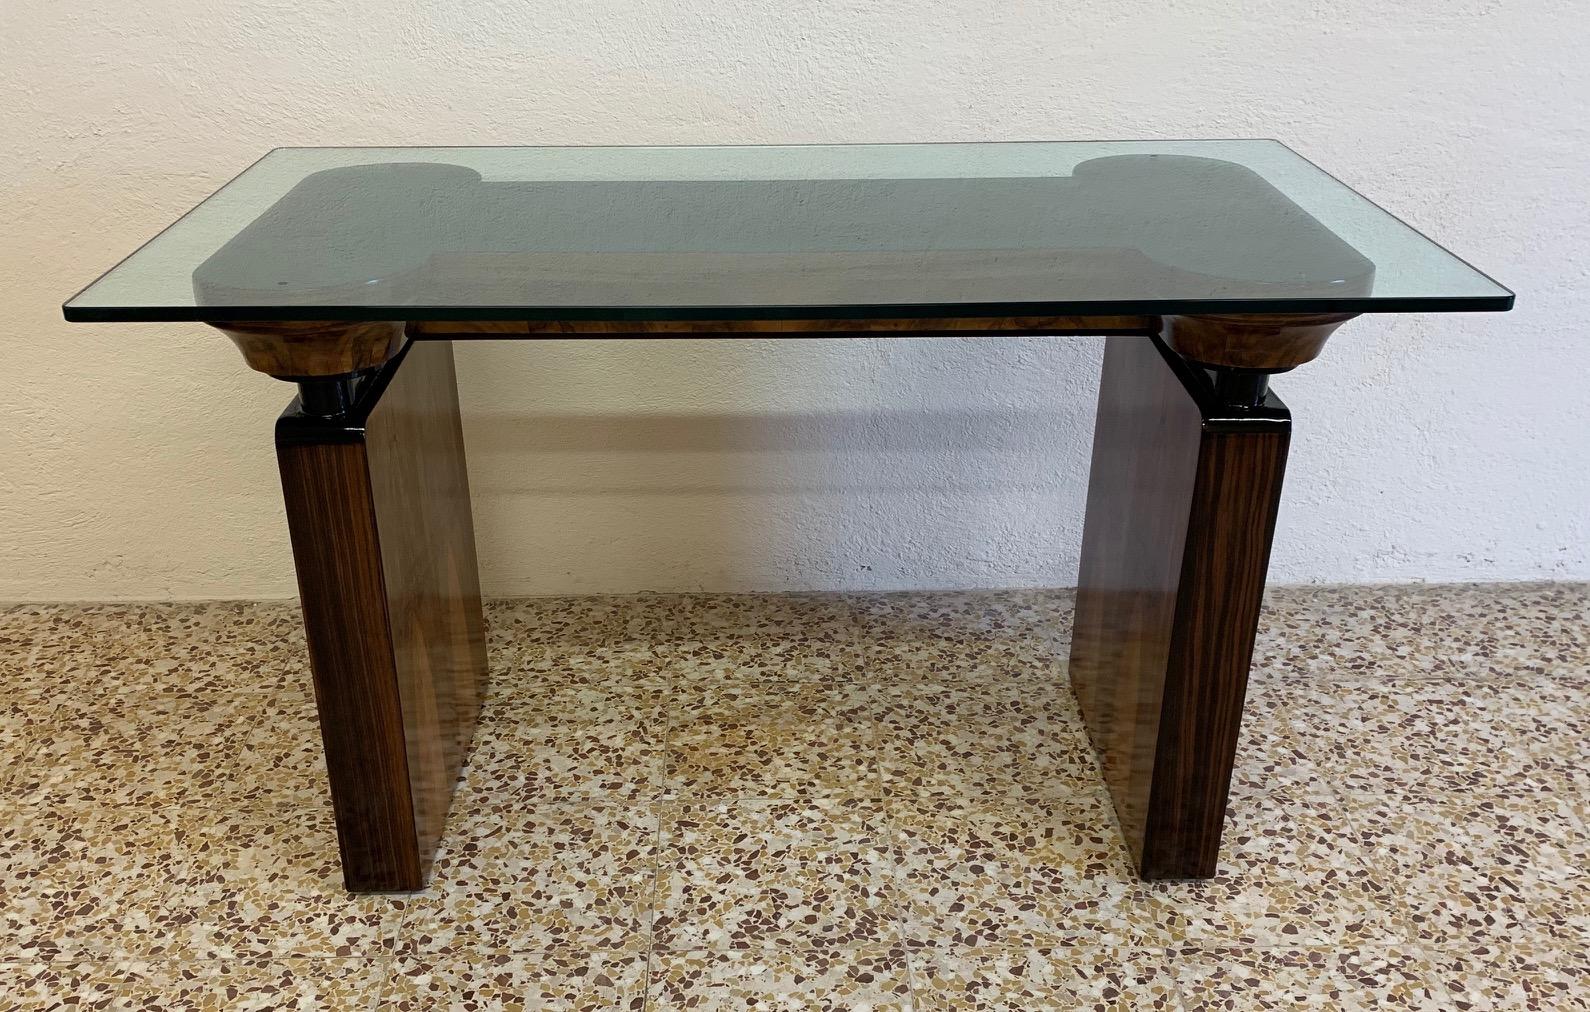 Particular and rare Italian writing desk from the 1940s.
The legs are in walnut and Macassar with ebonized details.
Top is in glass.